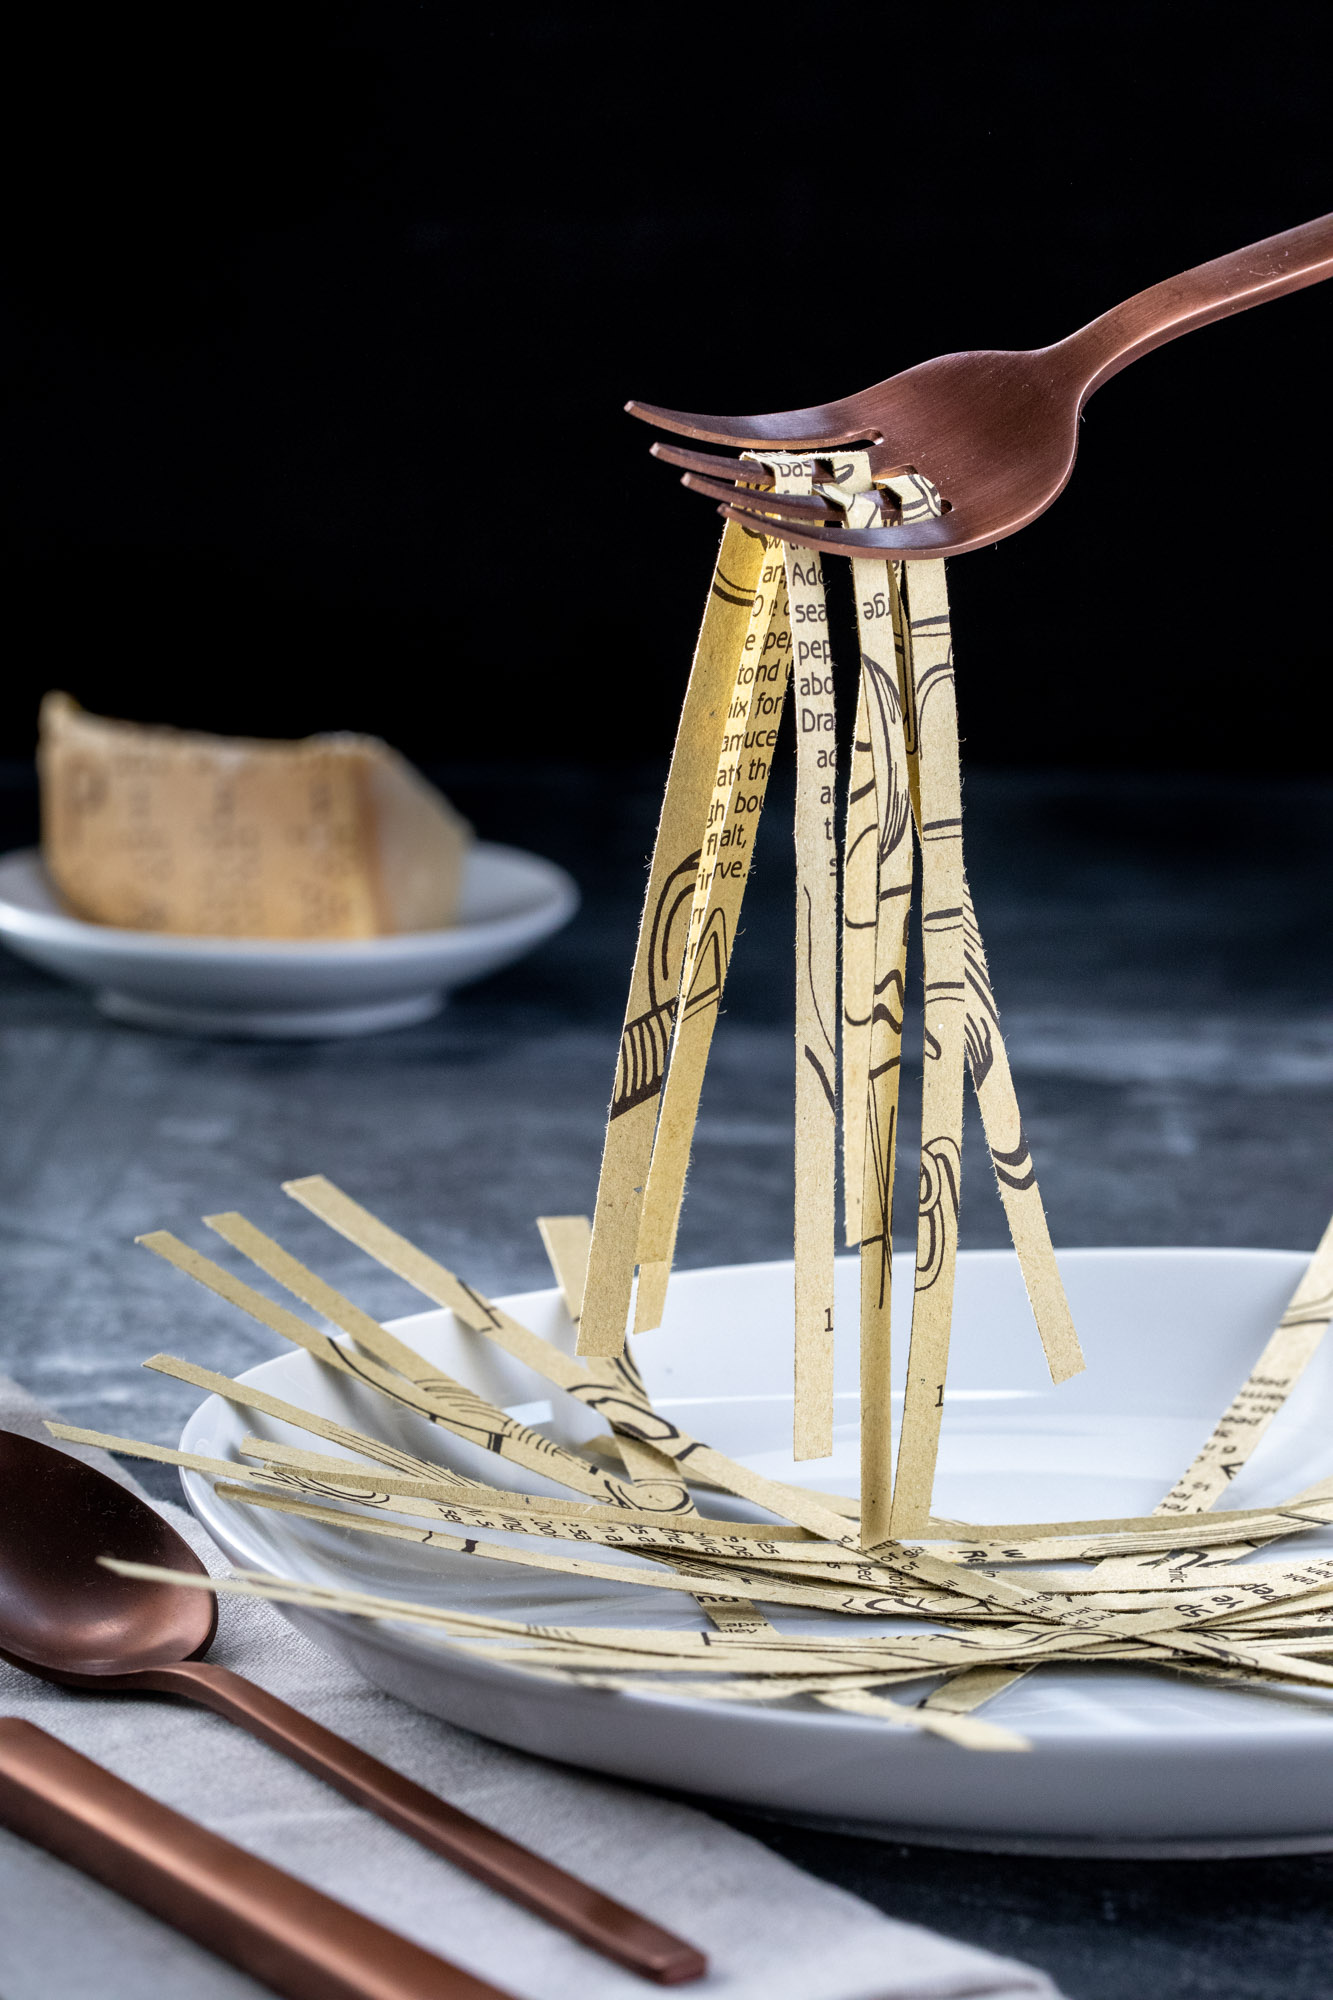 A pasta made out of paper